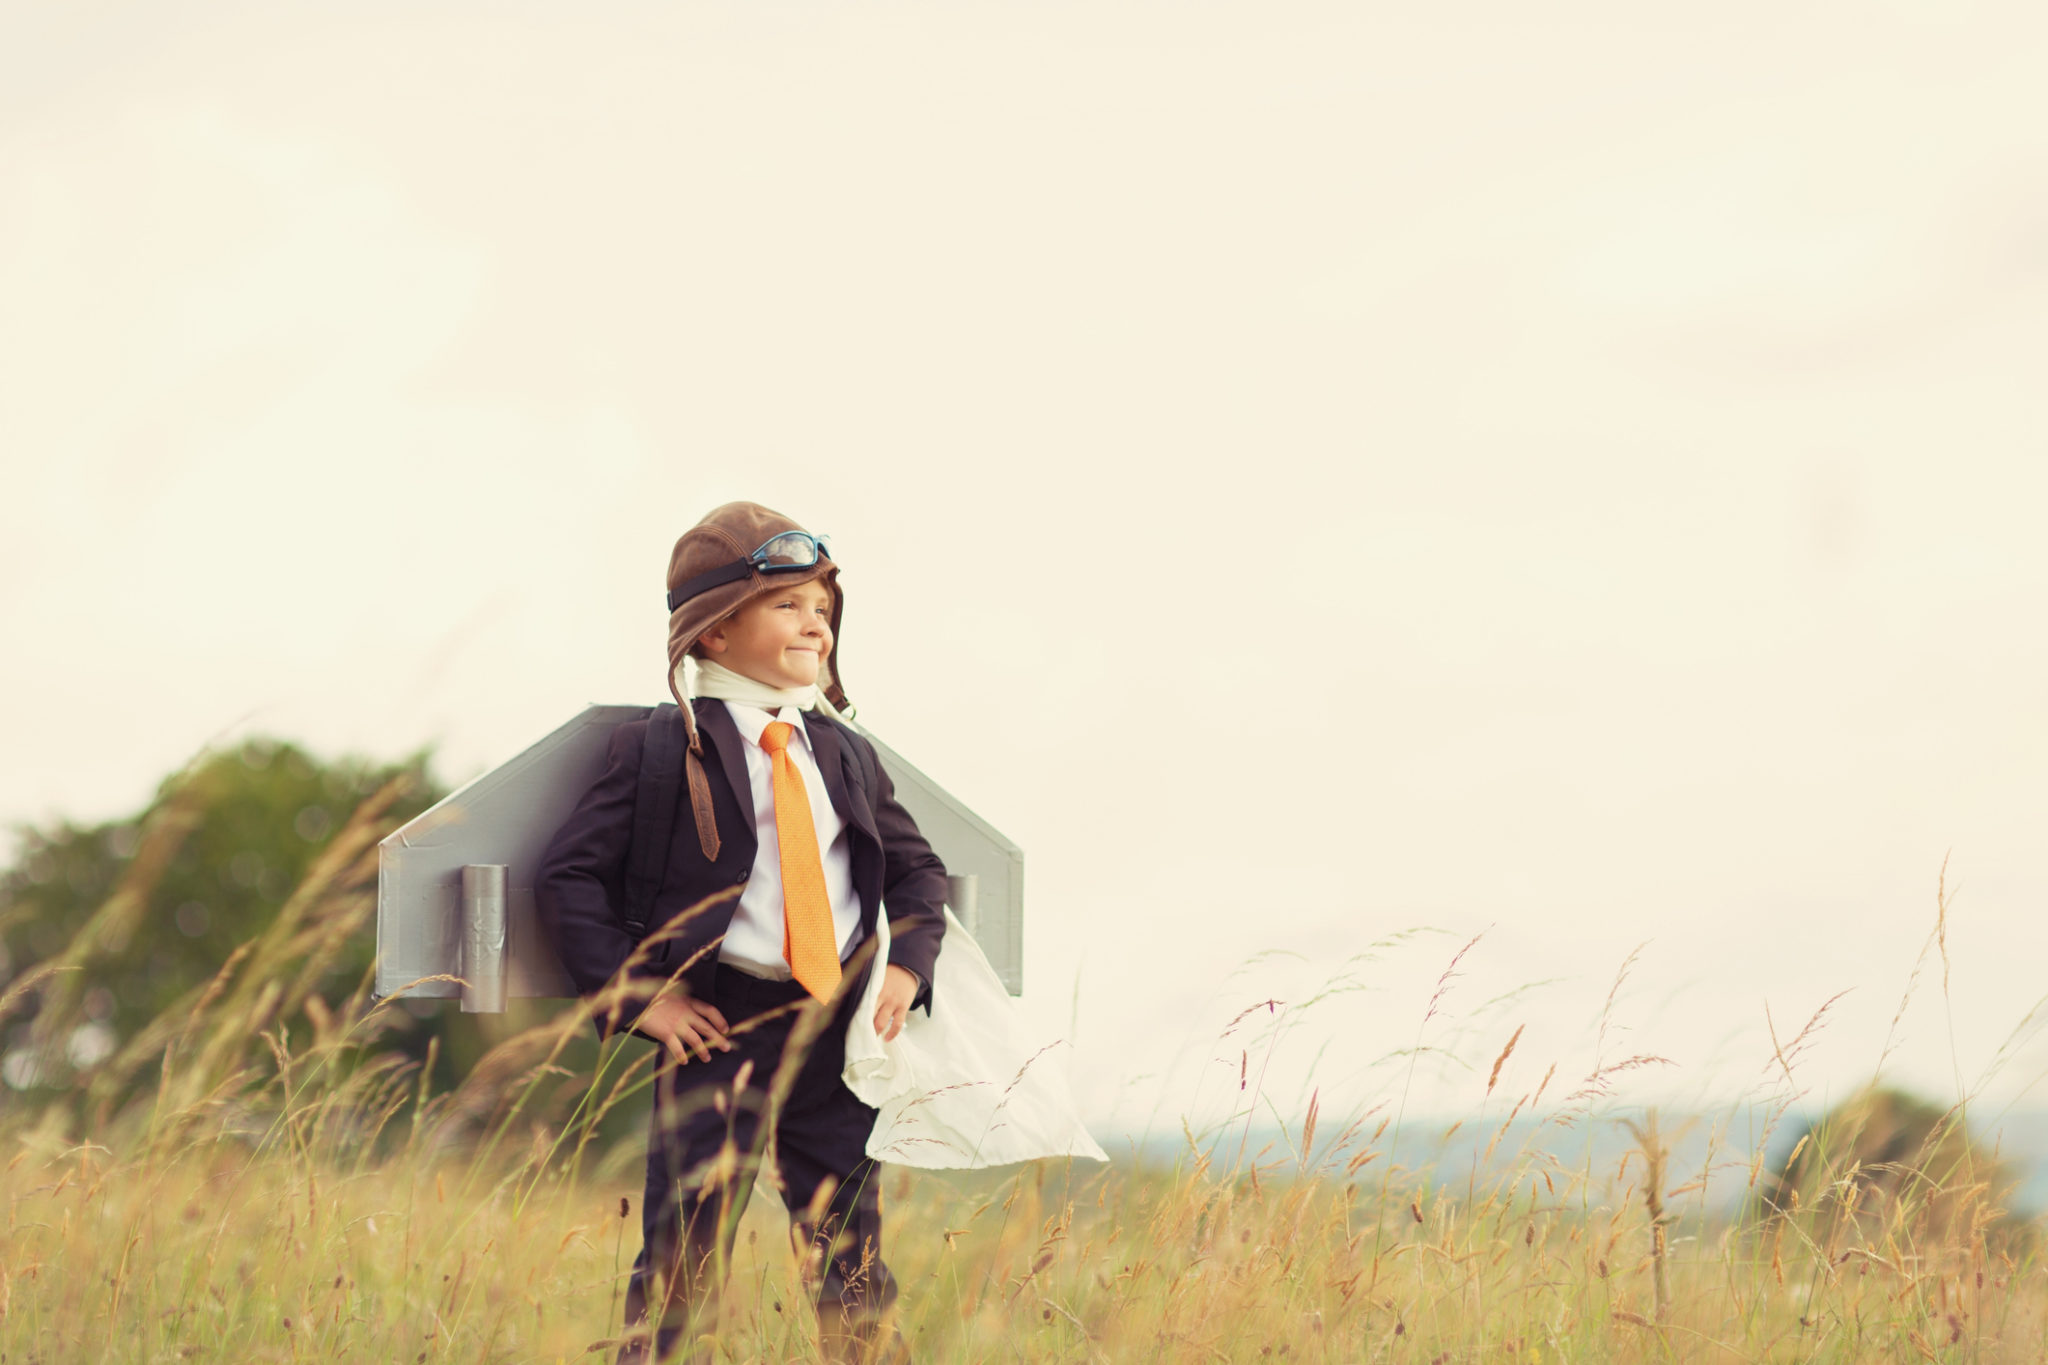 young kid in a suit standing triumphantly in a field